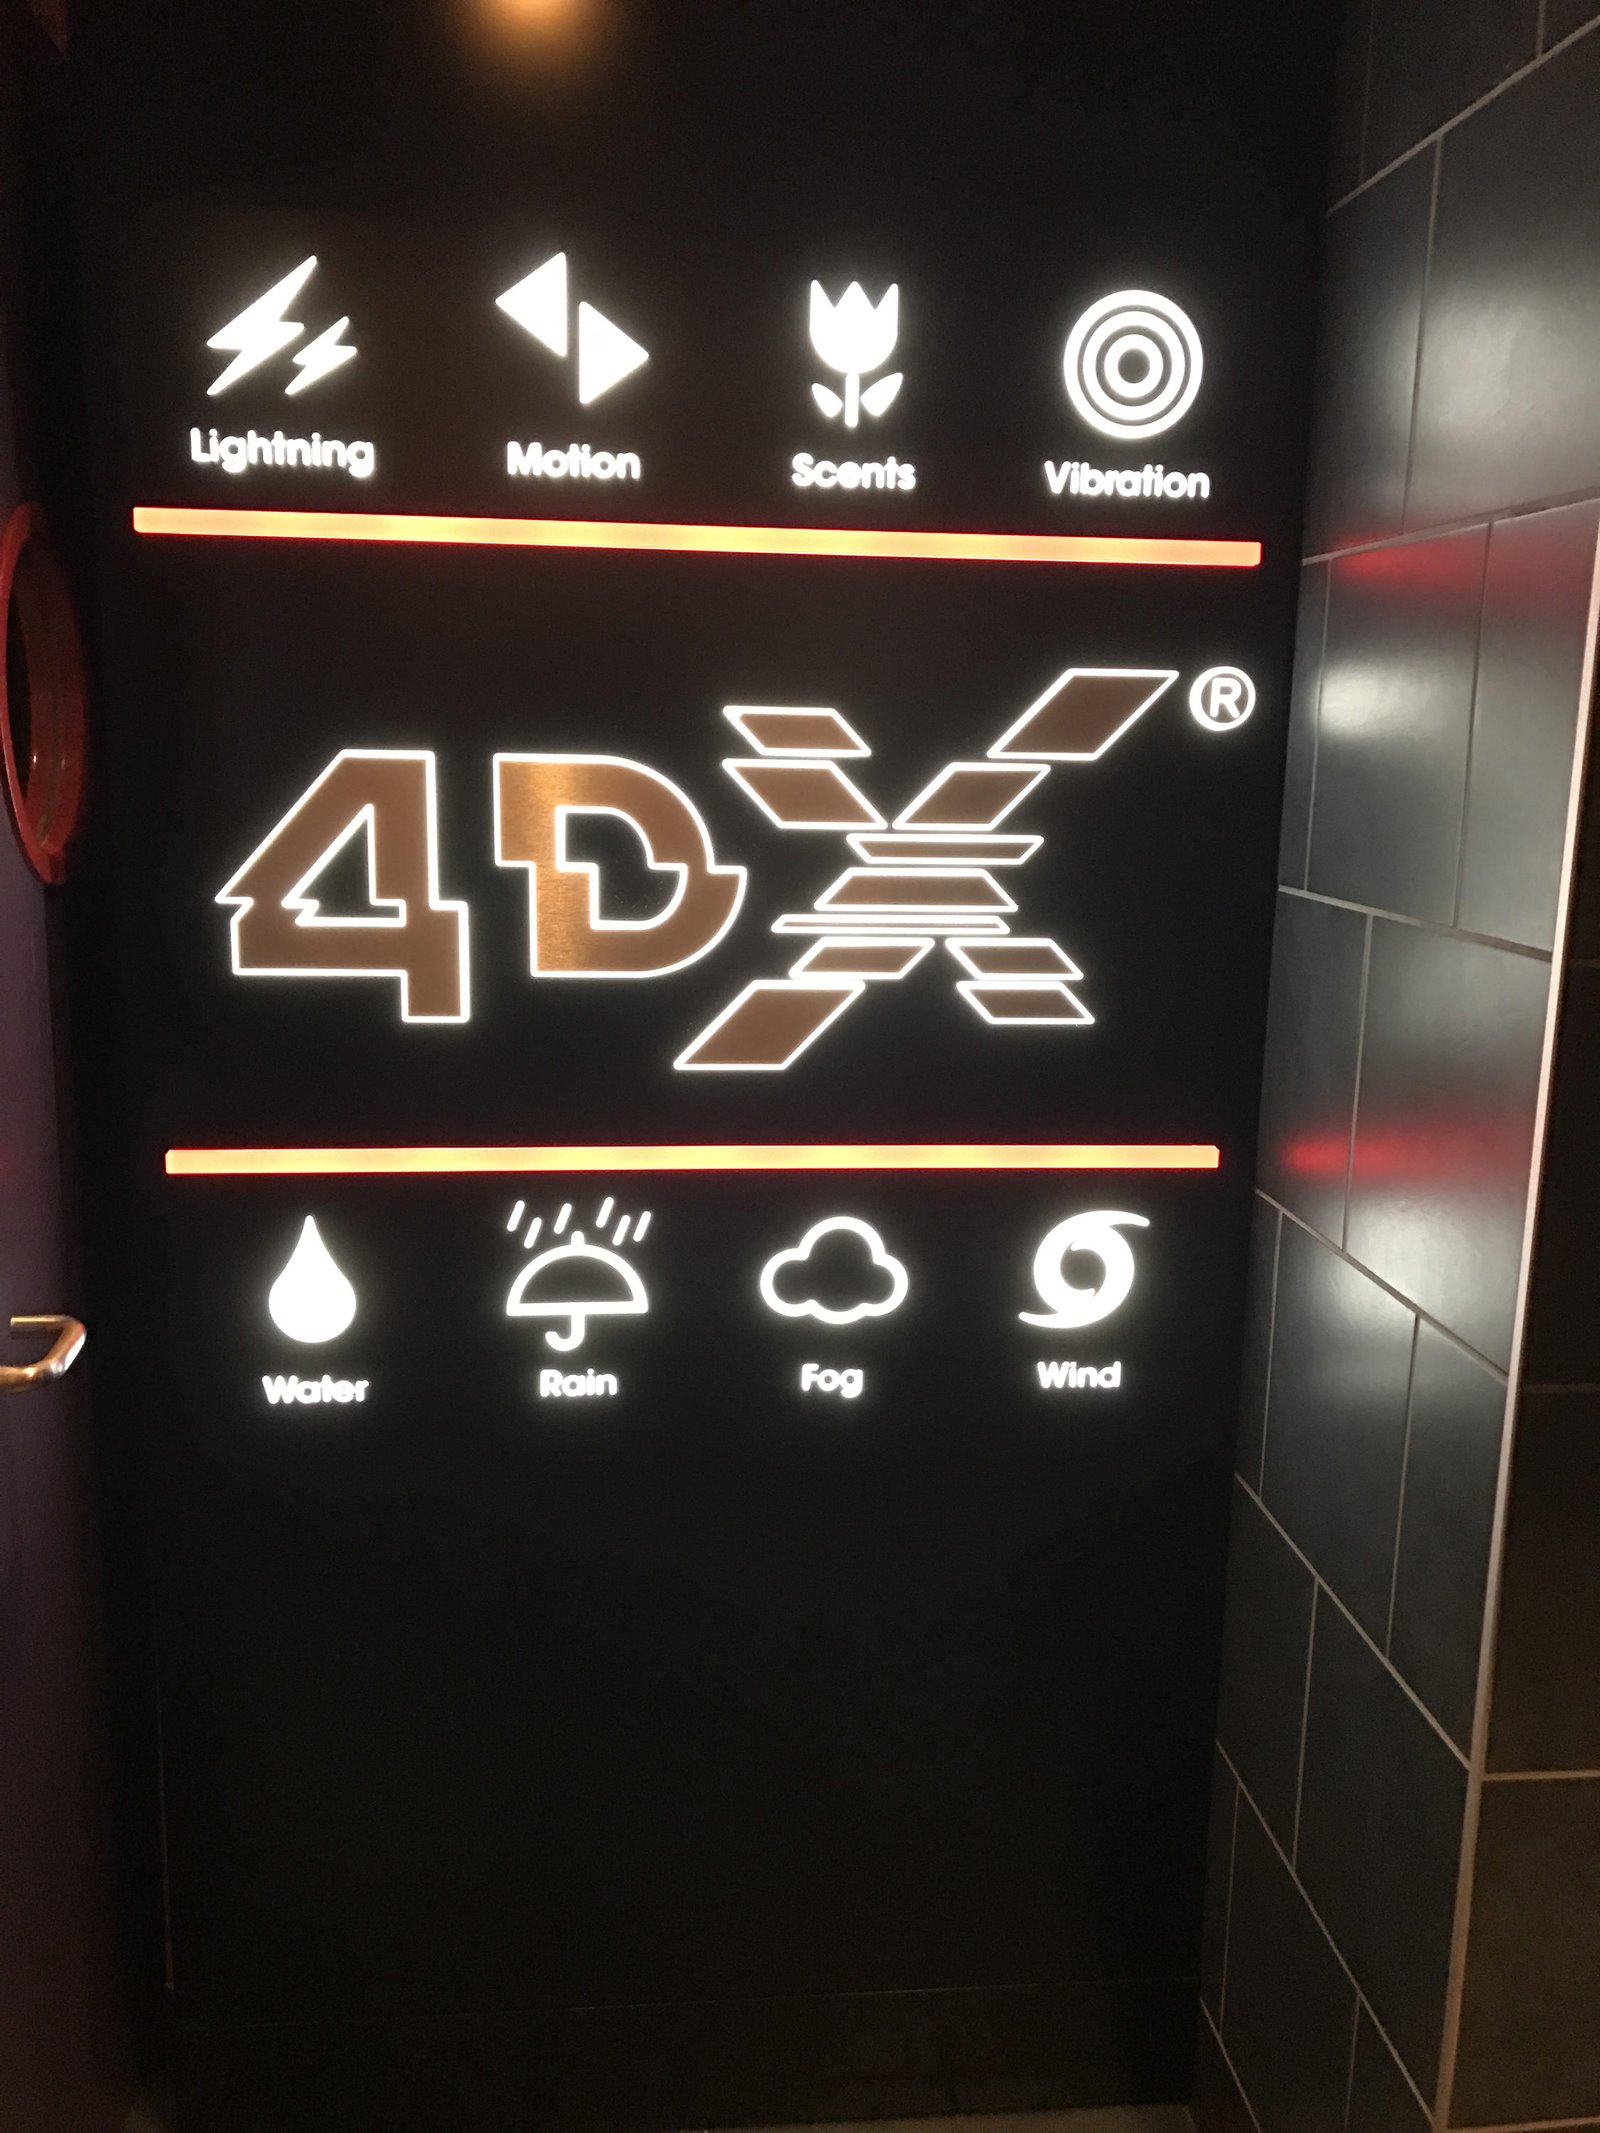 The 4DX Experience2250 x 3000